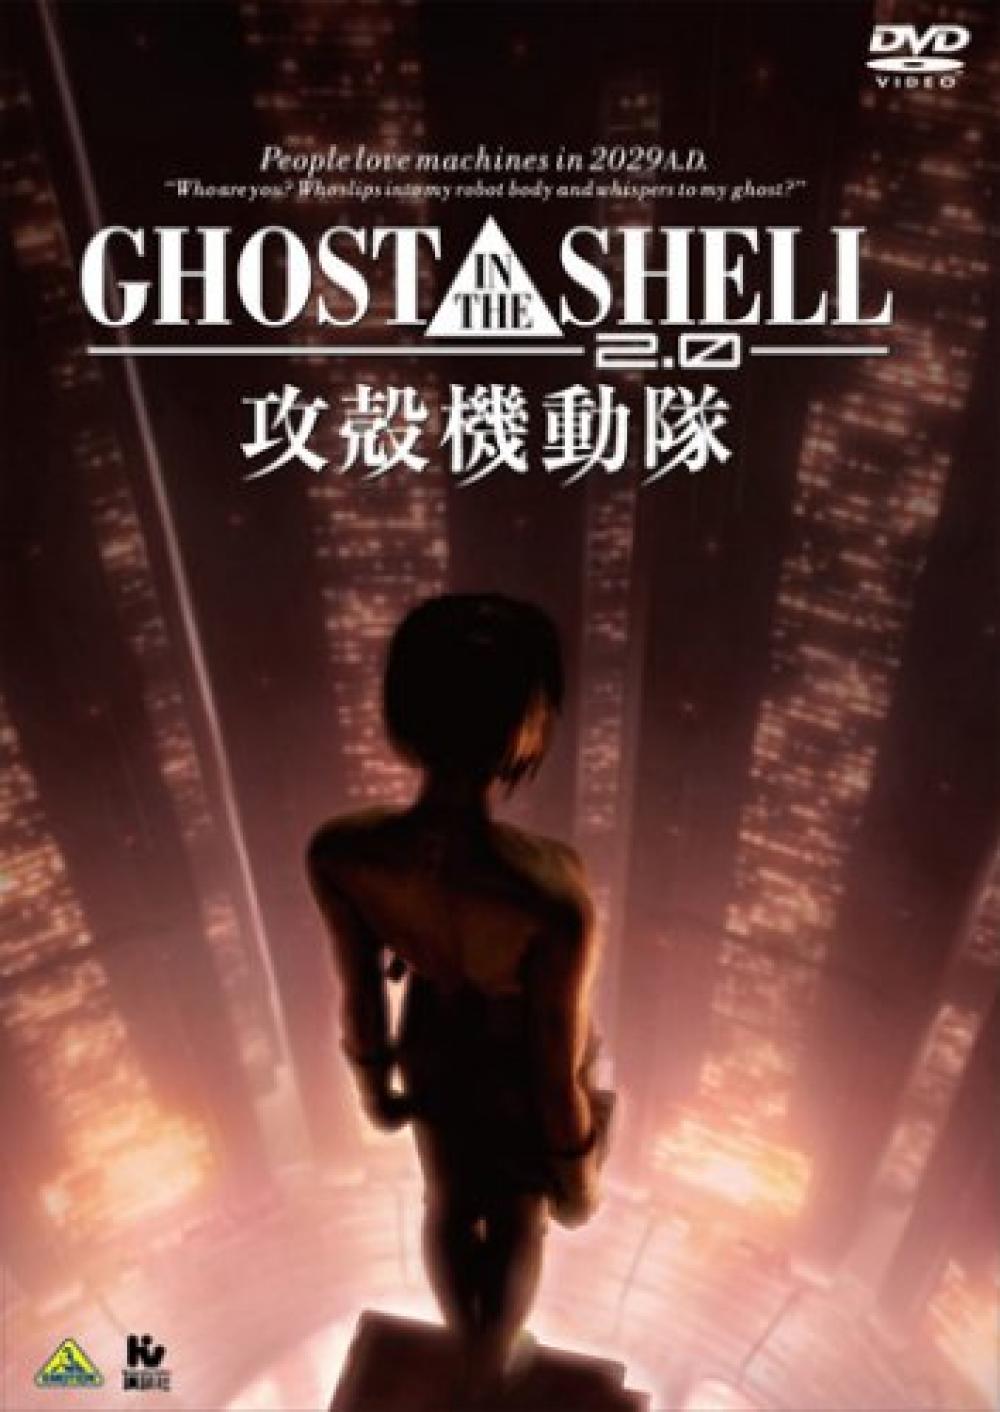 『GHOST IN THE SHELL 攻殻機動隊2.0』